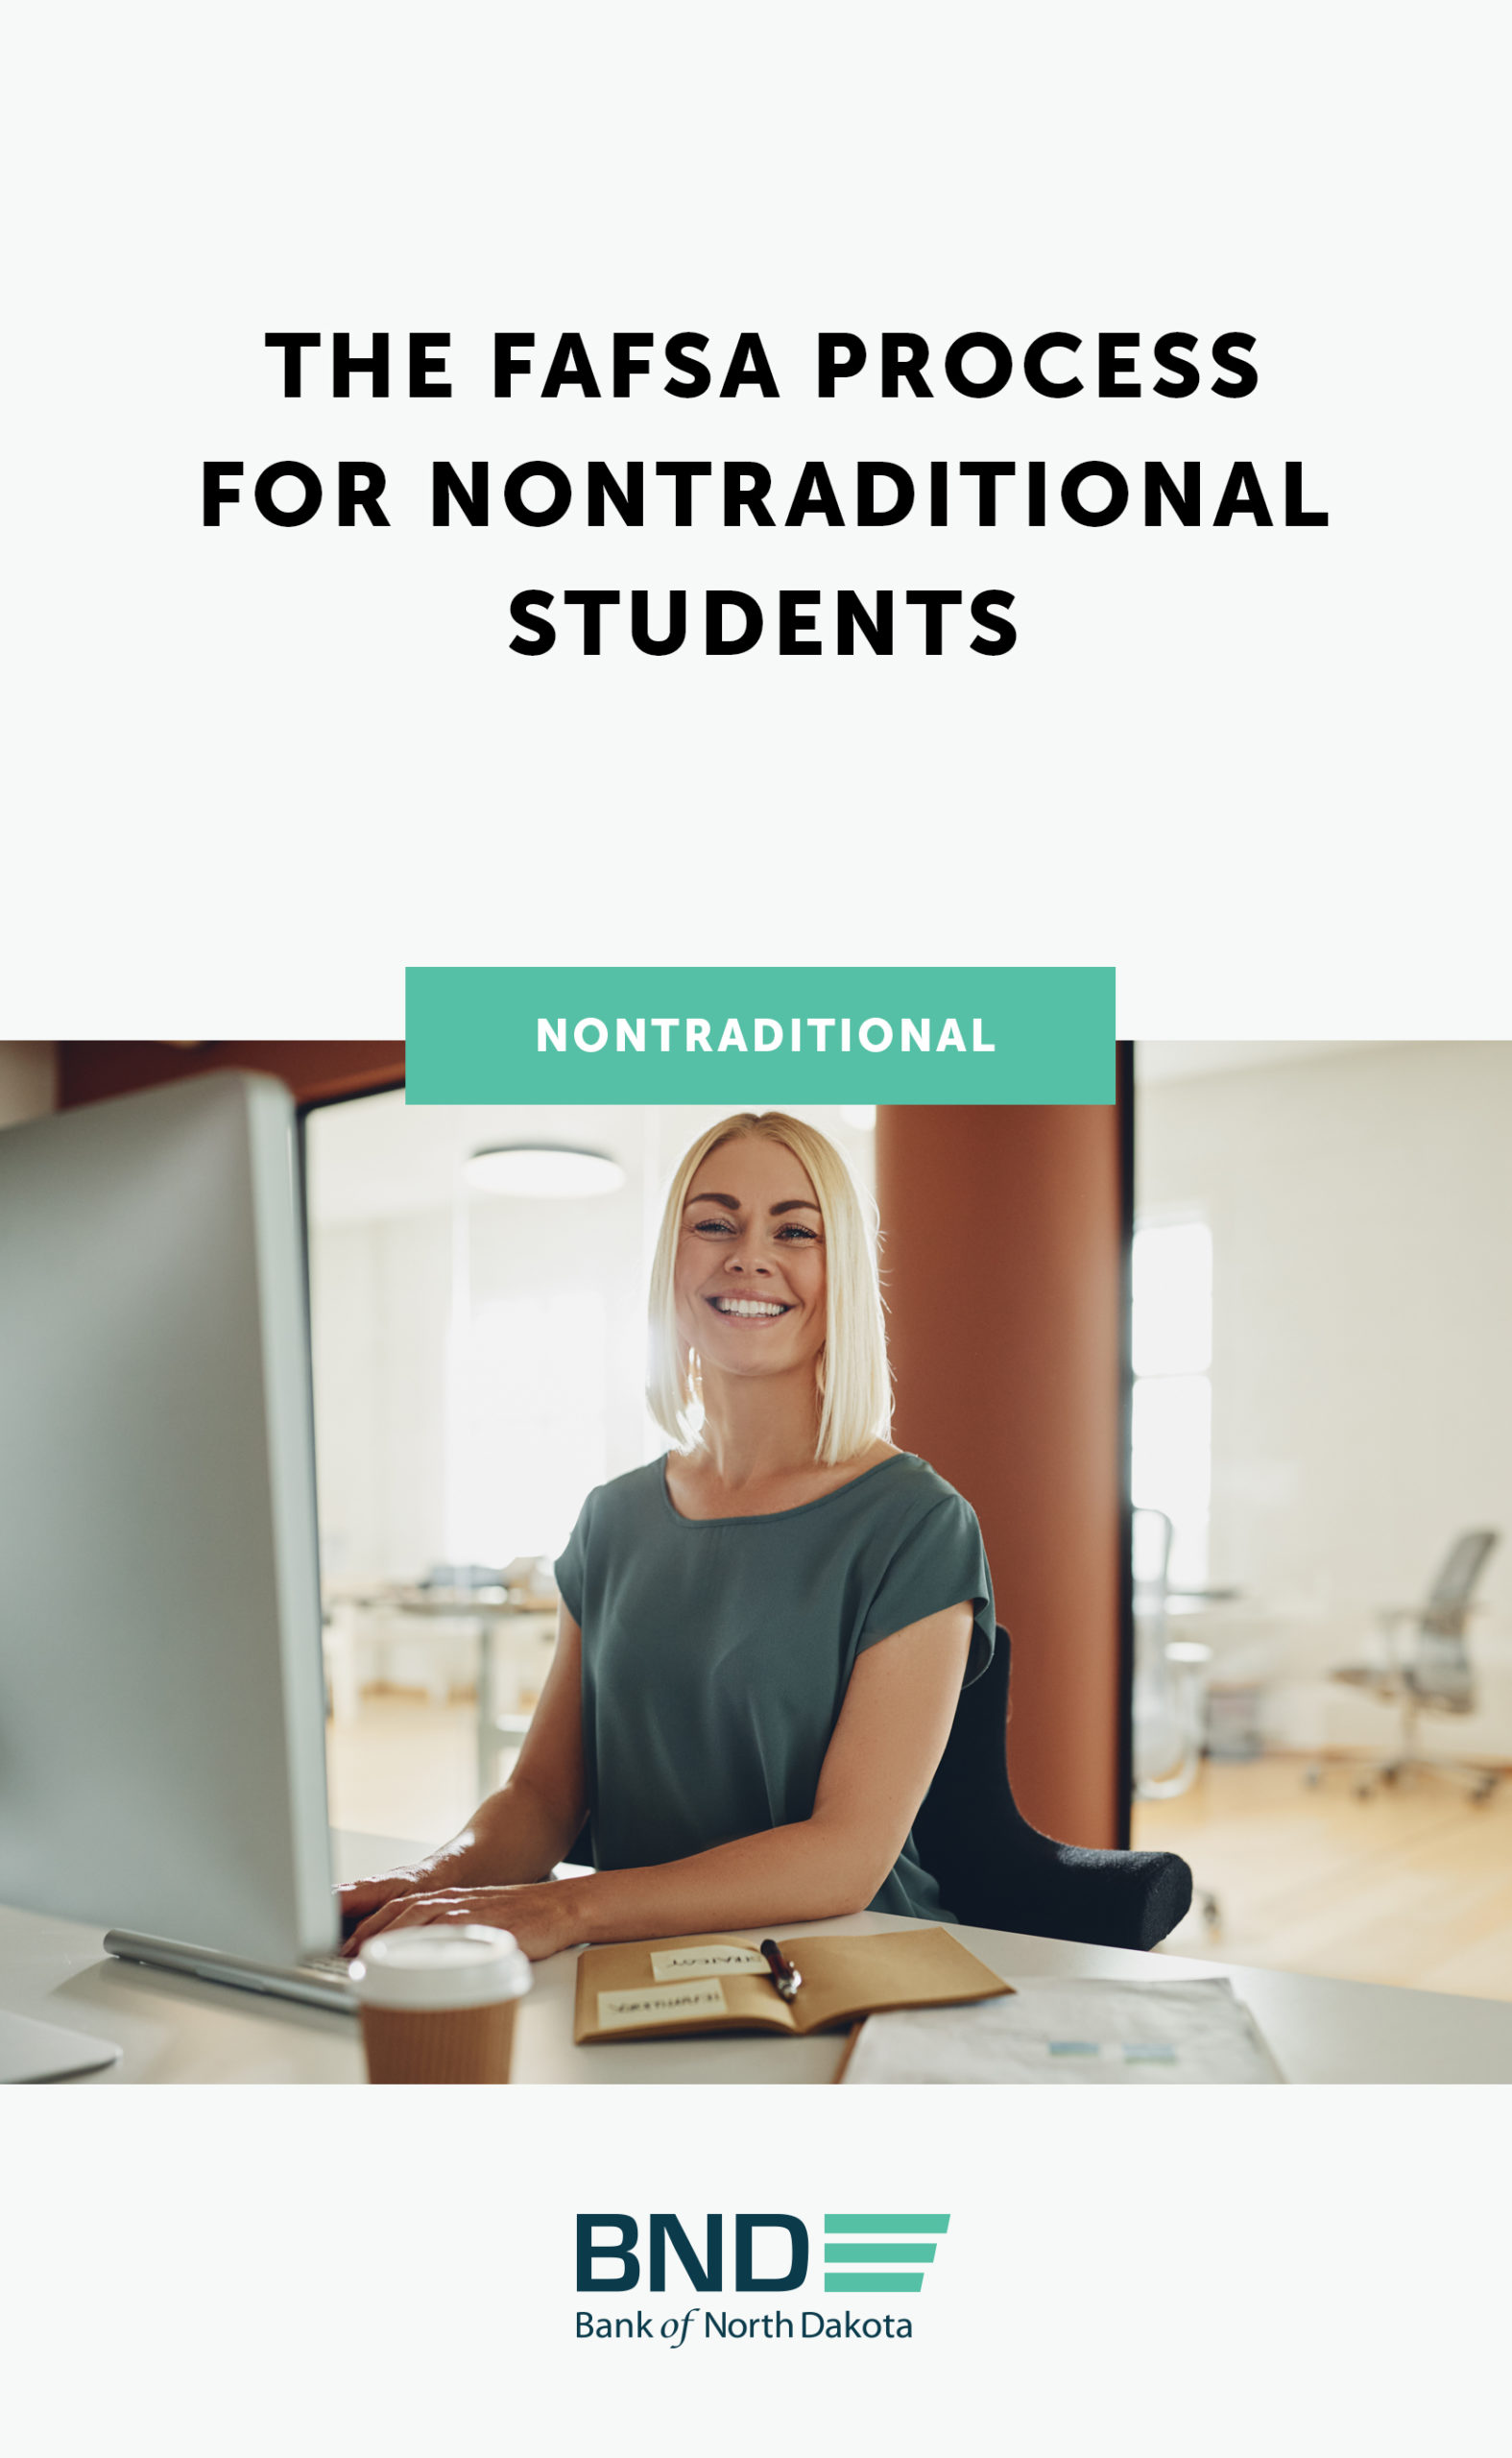 The FAFSA Process for Nontraditional Students